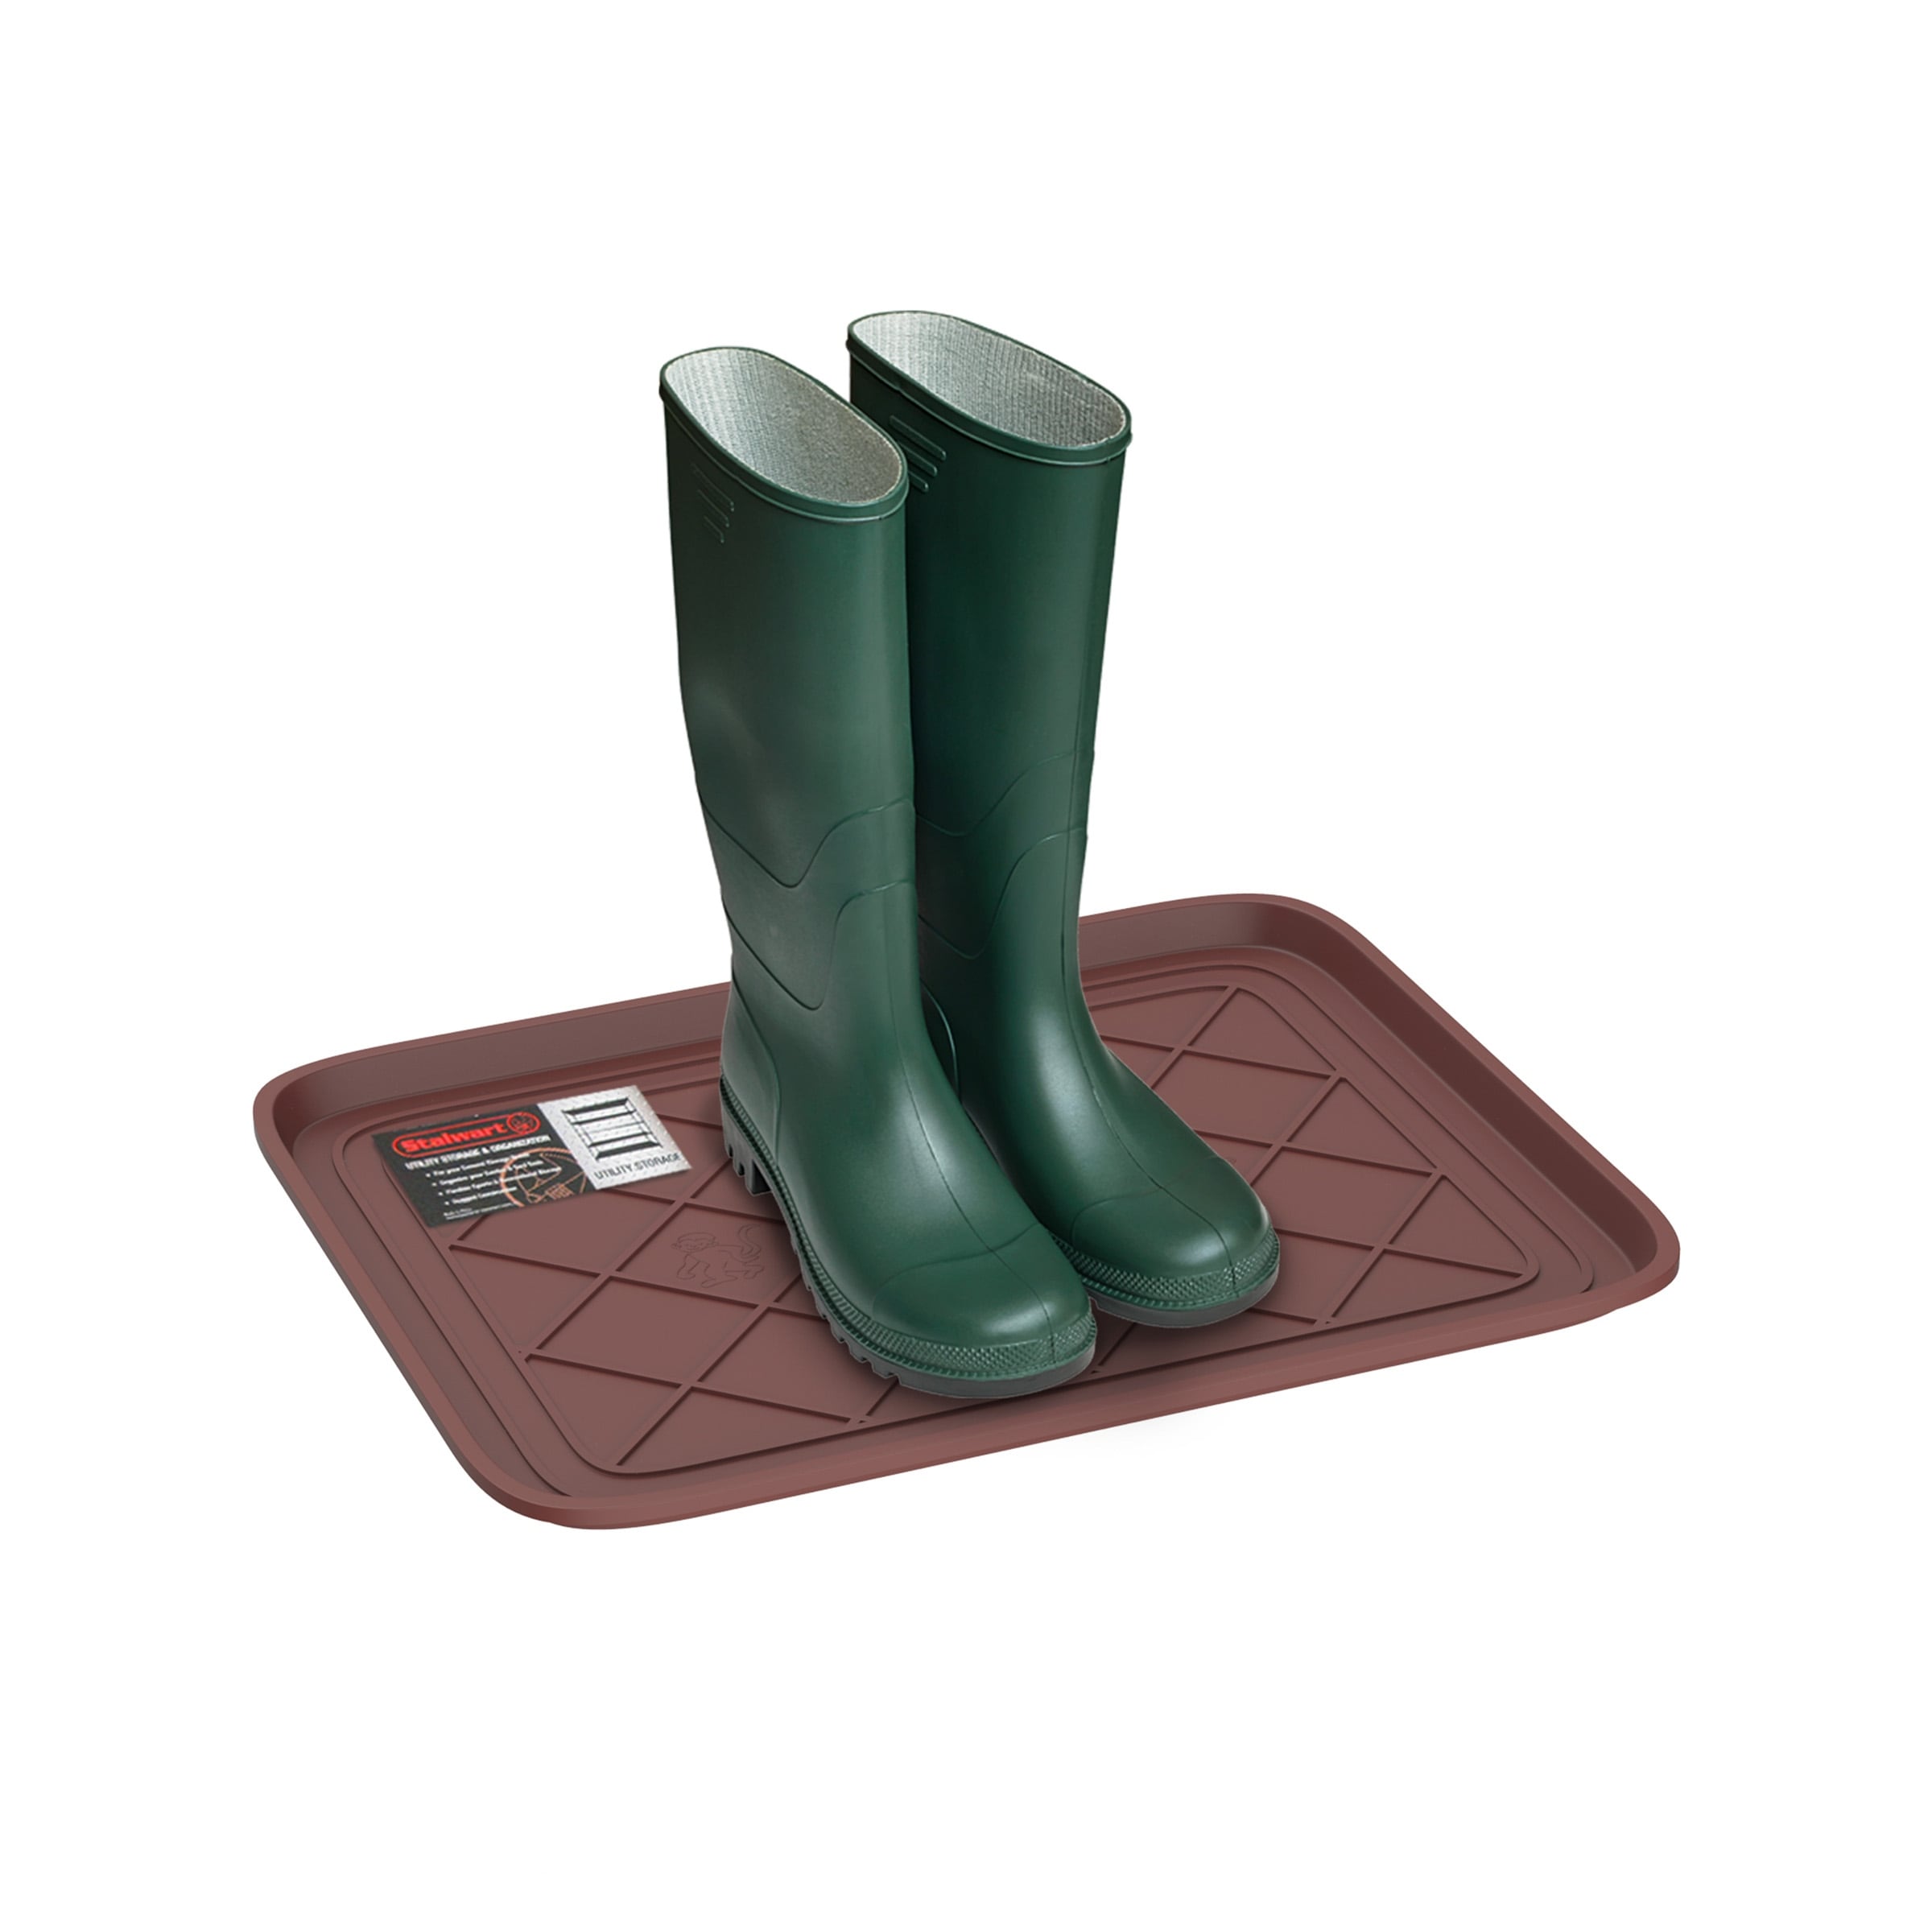 https://ak1.ostkcdn.com/images/products/is/images/direct/329ab9fd9c807f2b32f52dd286444d9f541e8ee0/All-Weather-Boot-Tray---Water-Resistant-Plastic-Utility-Shoe-Mat-for-Indoor-and-Outdoor-Use-by-Stalwart.jpg